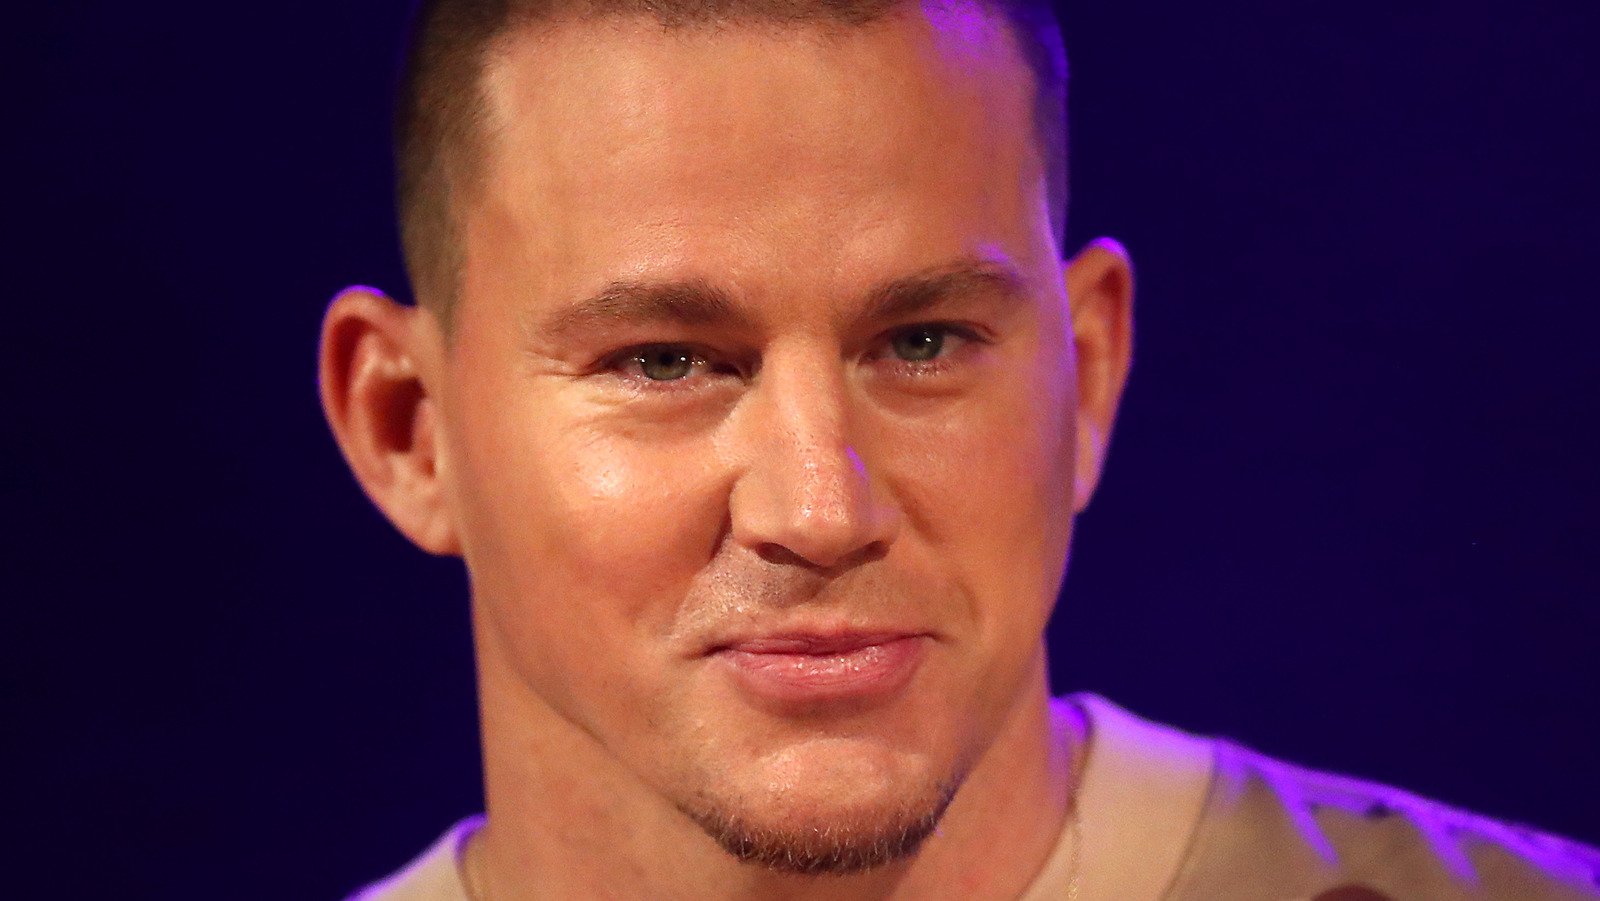 Channing Tatum Pretty Much Disappeared, And It's Obvious Why